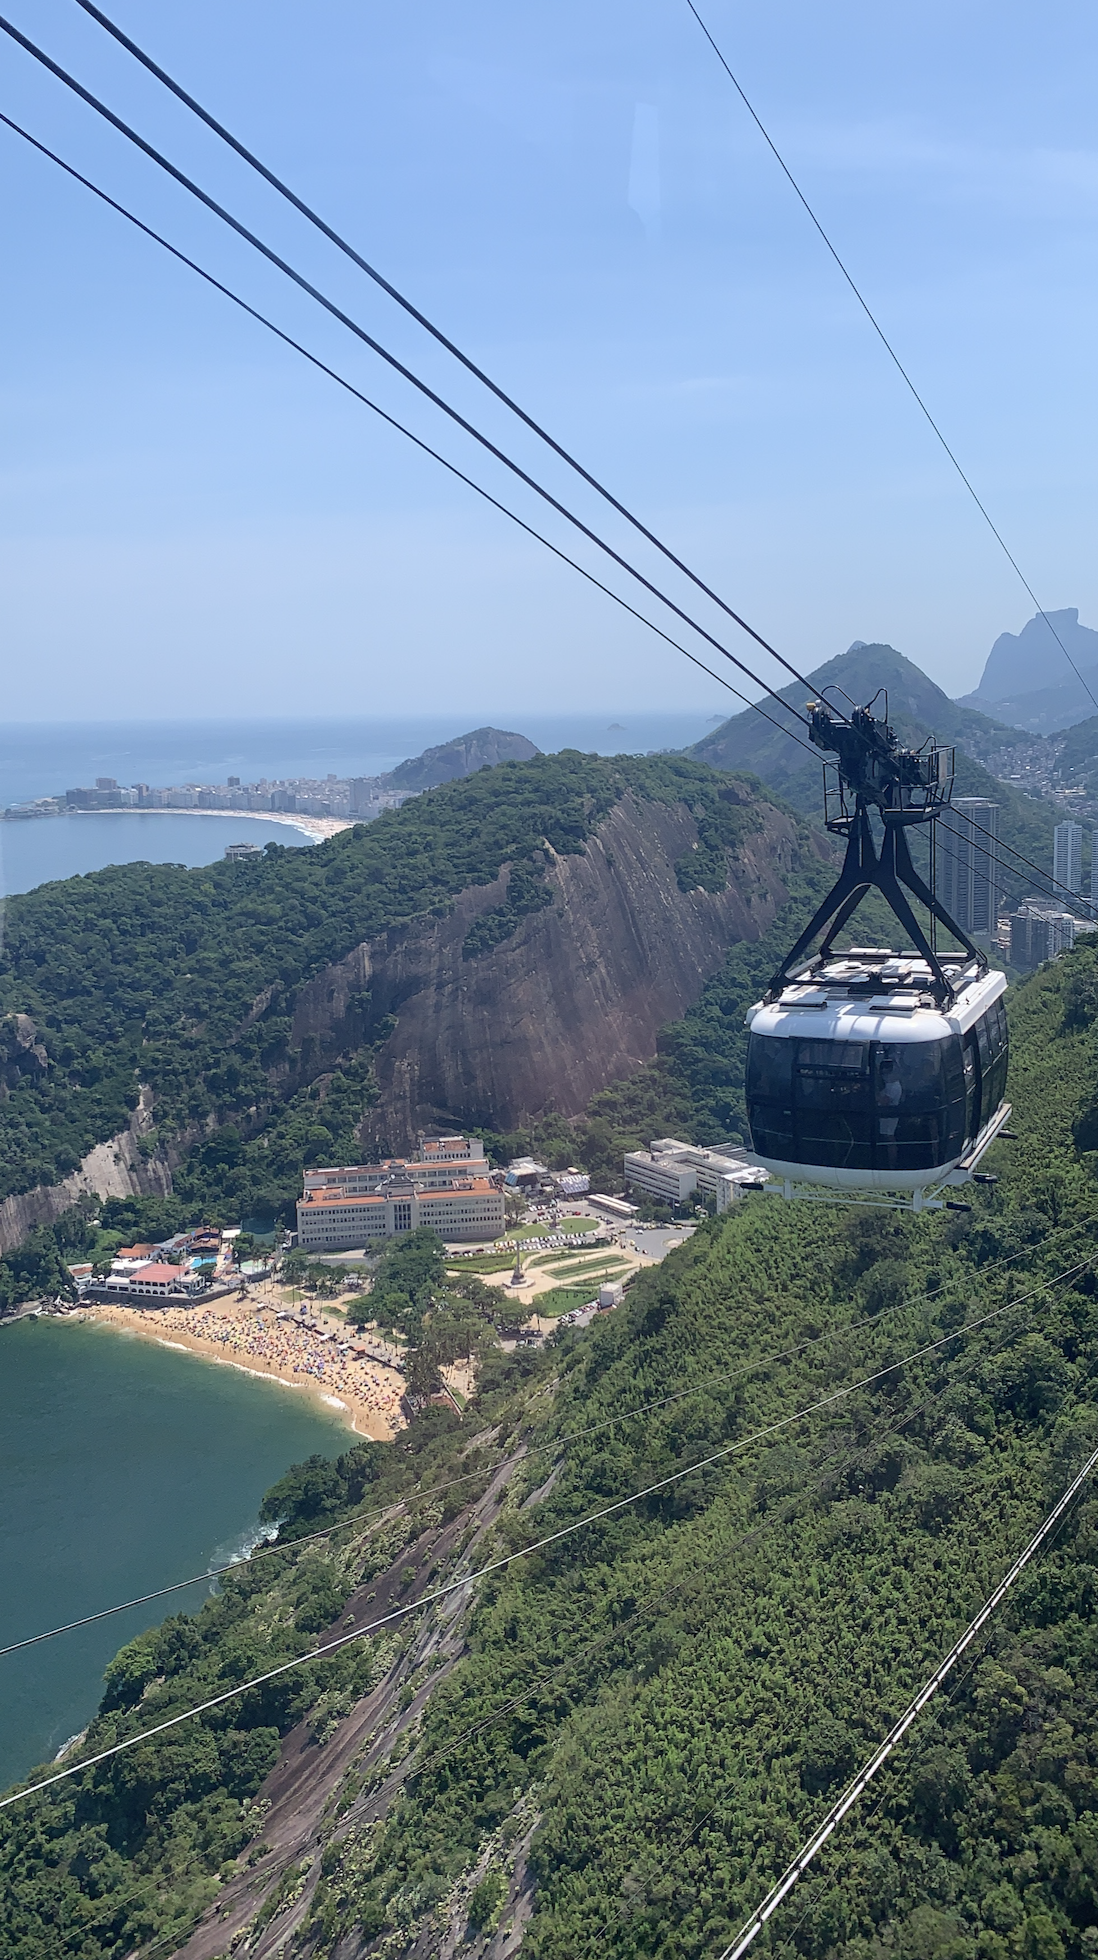 10 Things to KNOW Before Visiting Sugarloaf Mountain, Rio (Pão de